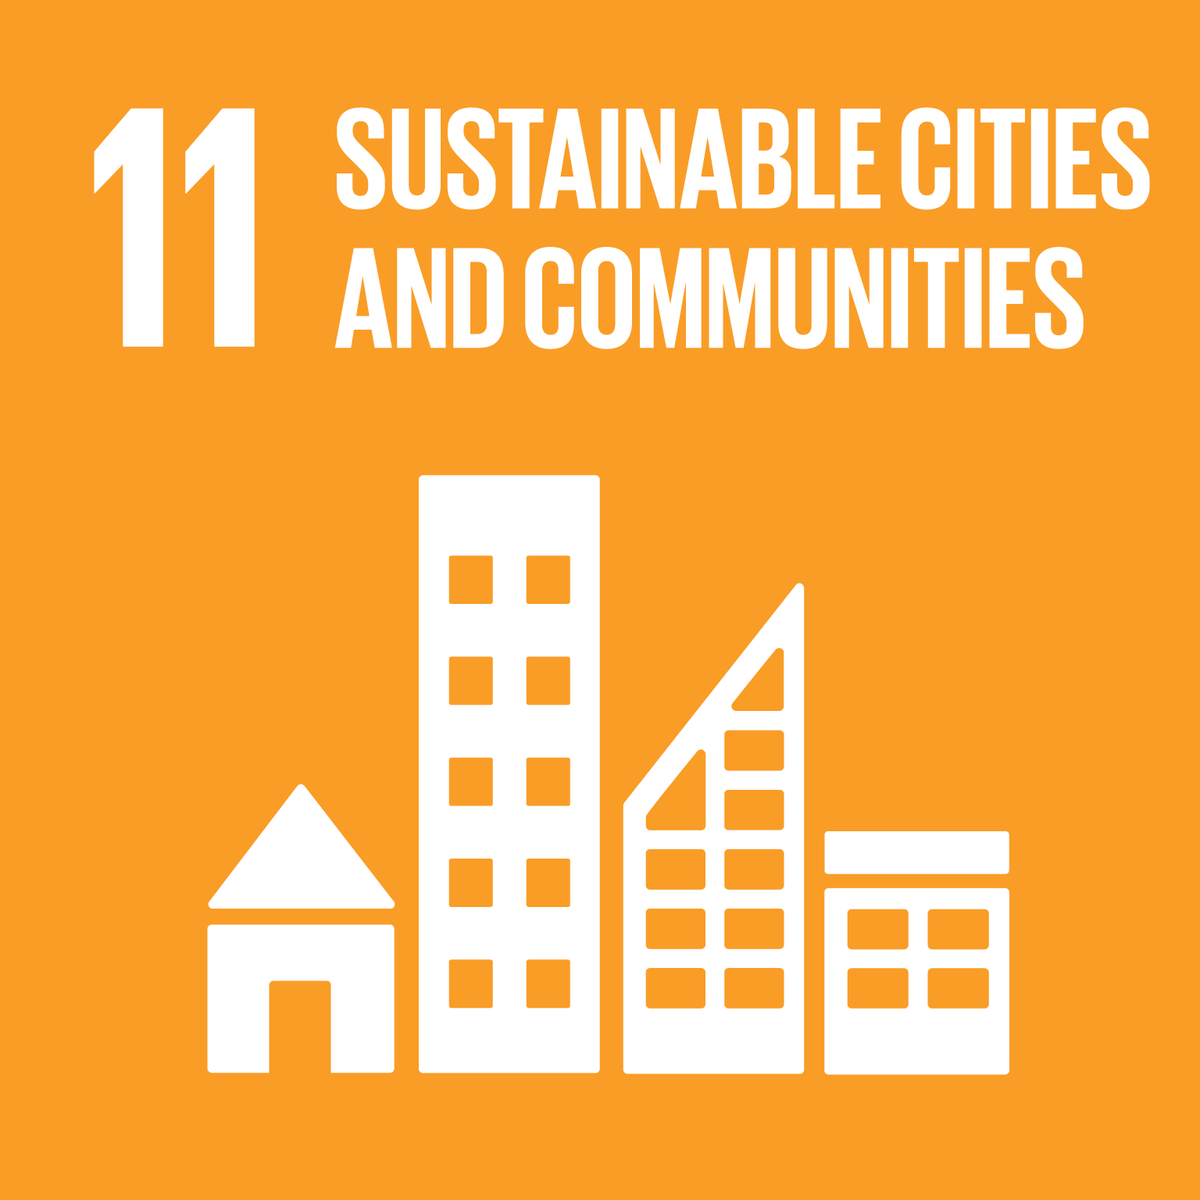 SDG11 - Sustainable cities and communities